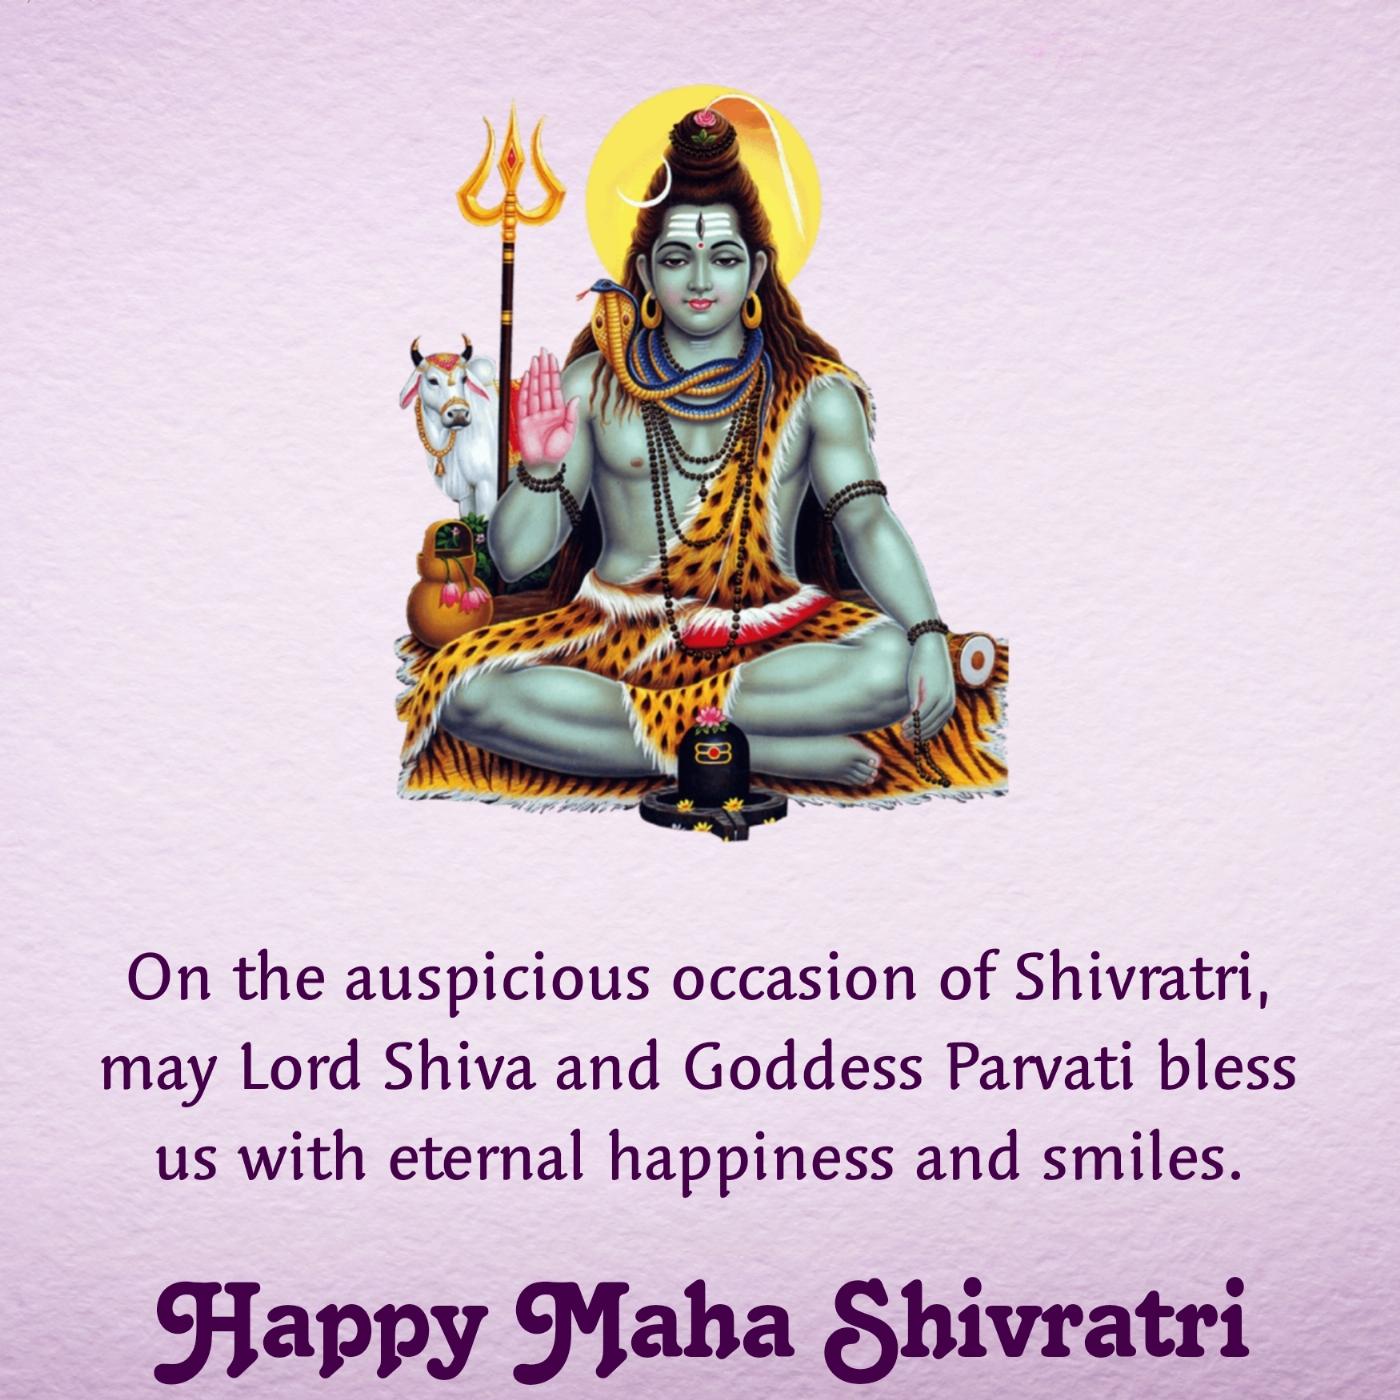 On the auspicious occasion of Shivratri may Lord Shiva and Goddess Parvati